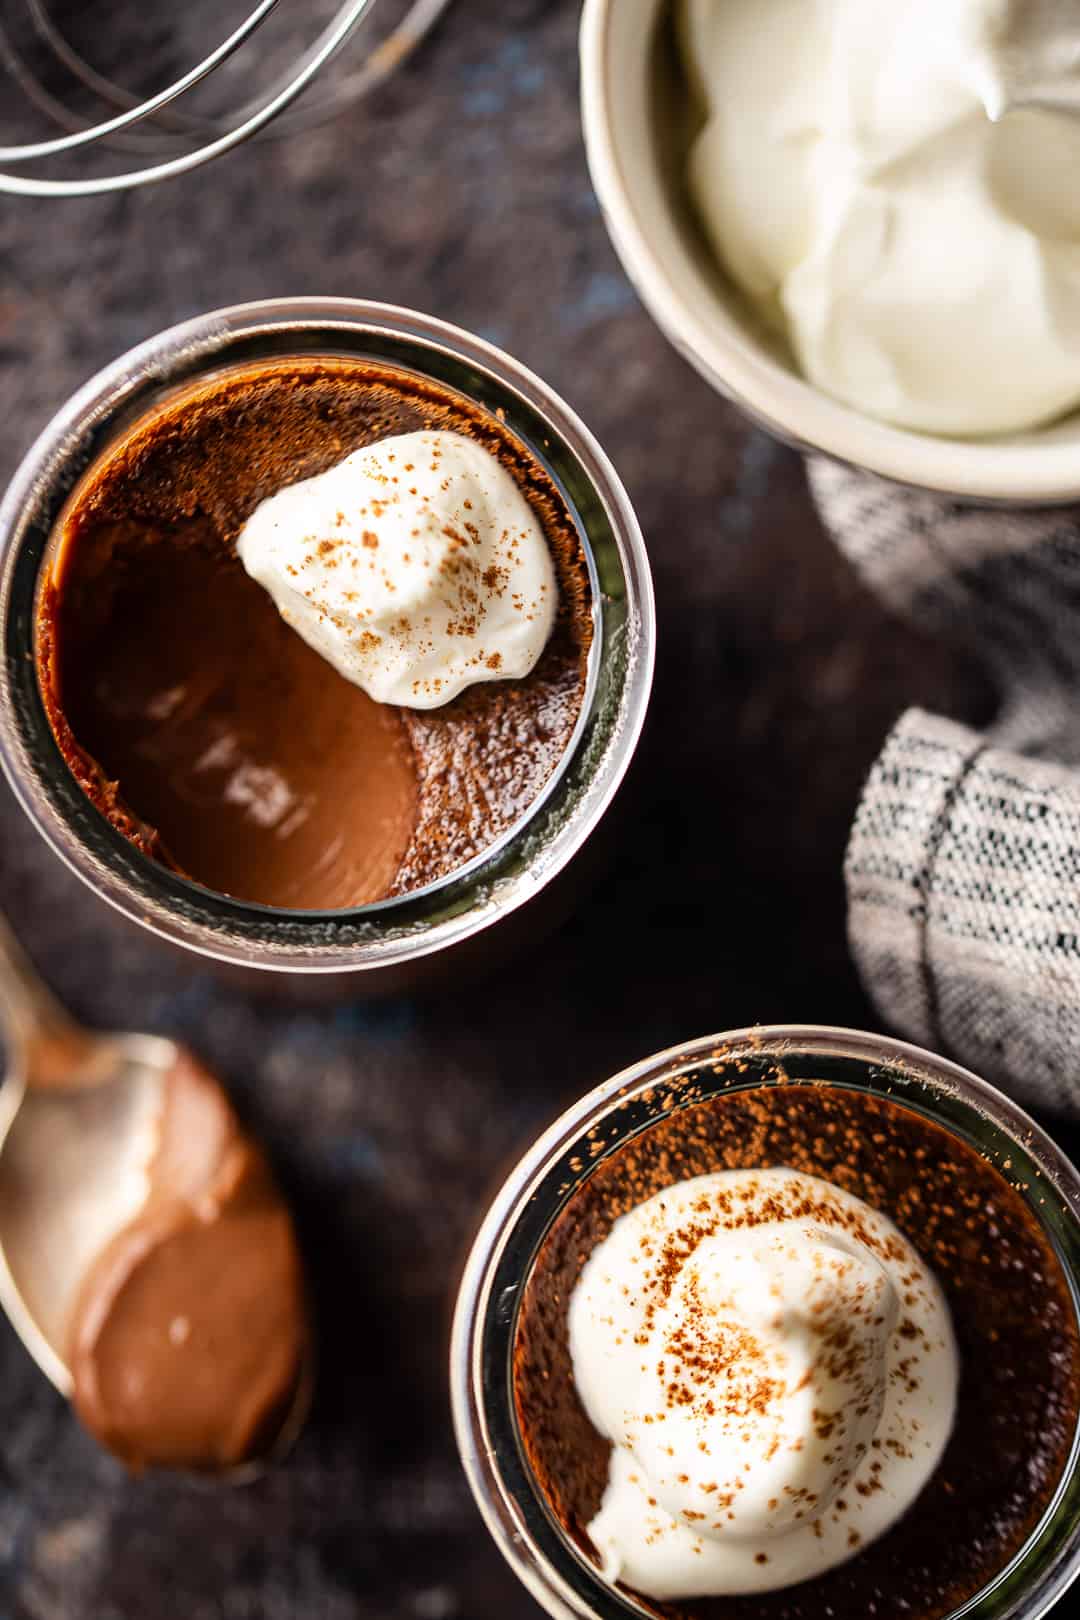 Chocolate pot de creme baked in jars and served with softly whipped cream.